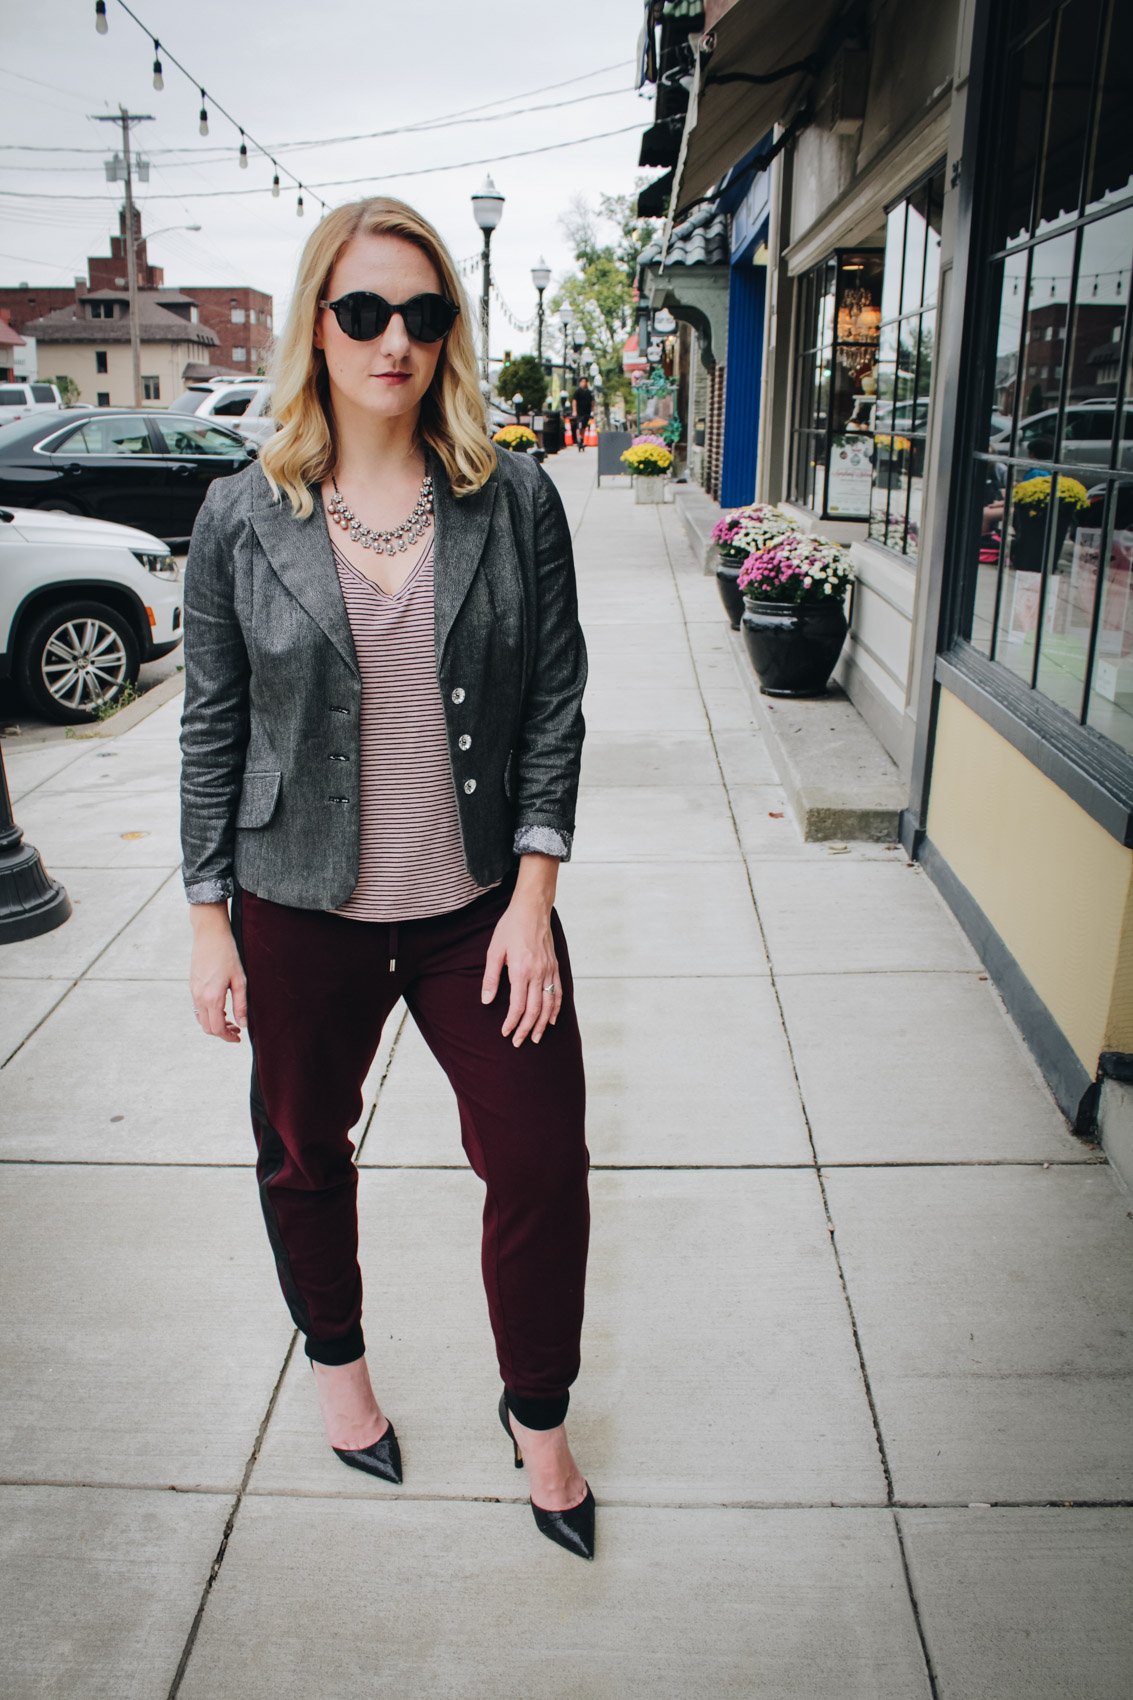 Outfit inspiration for dressing up jogger pants #falltrends #outfitideas #outfitoftheday